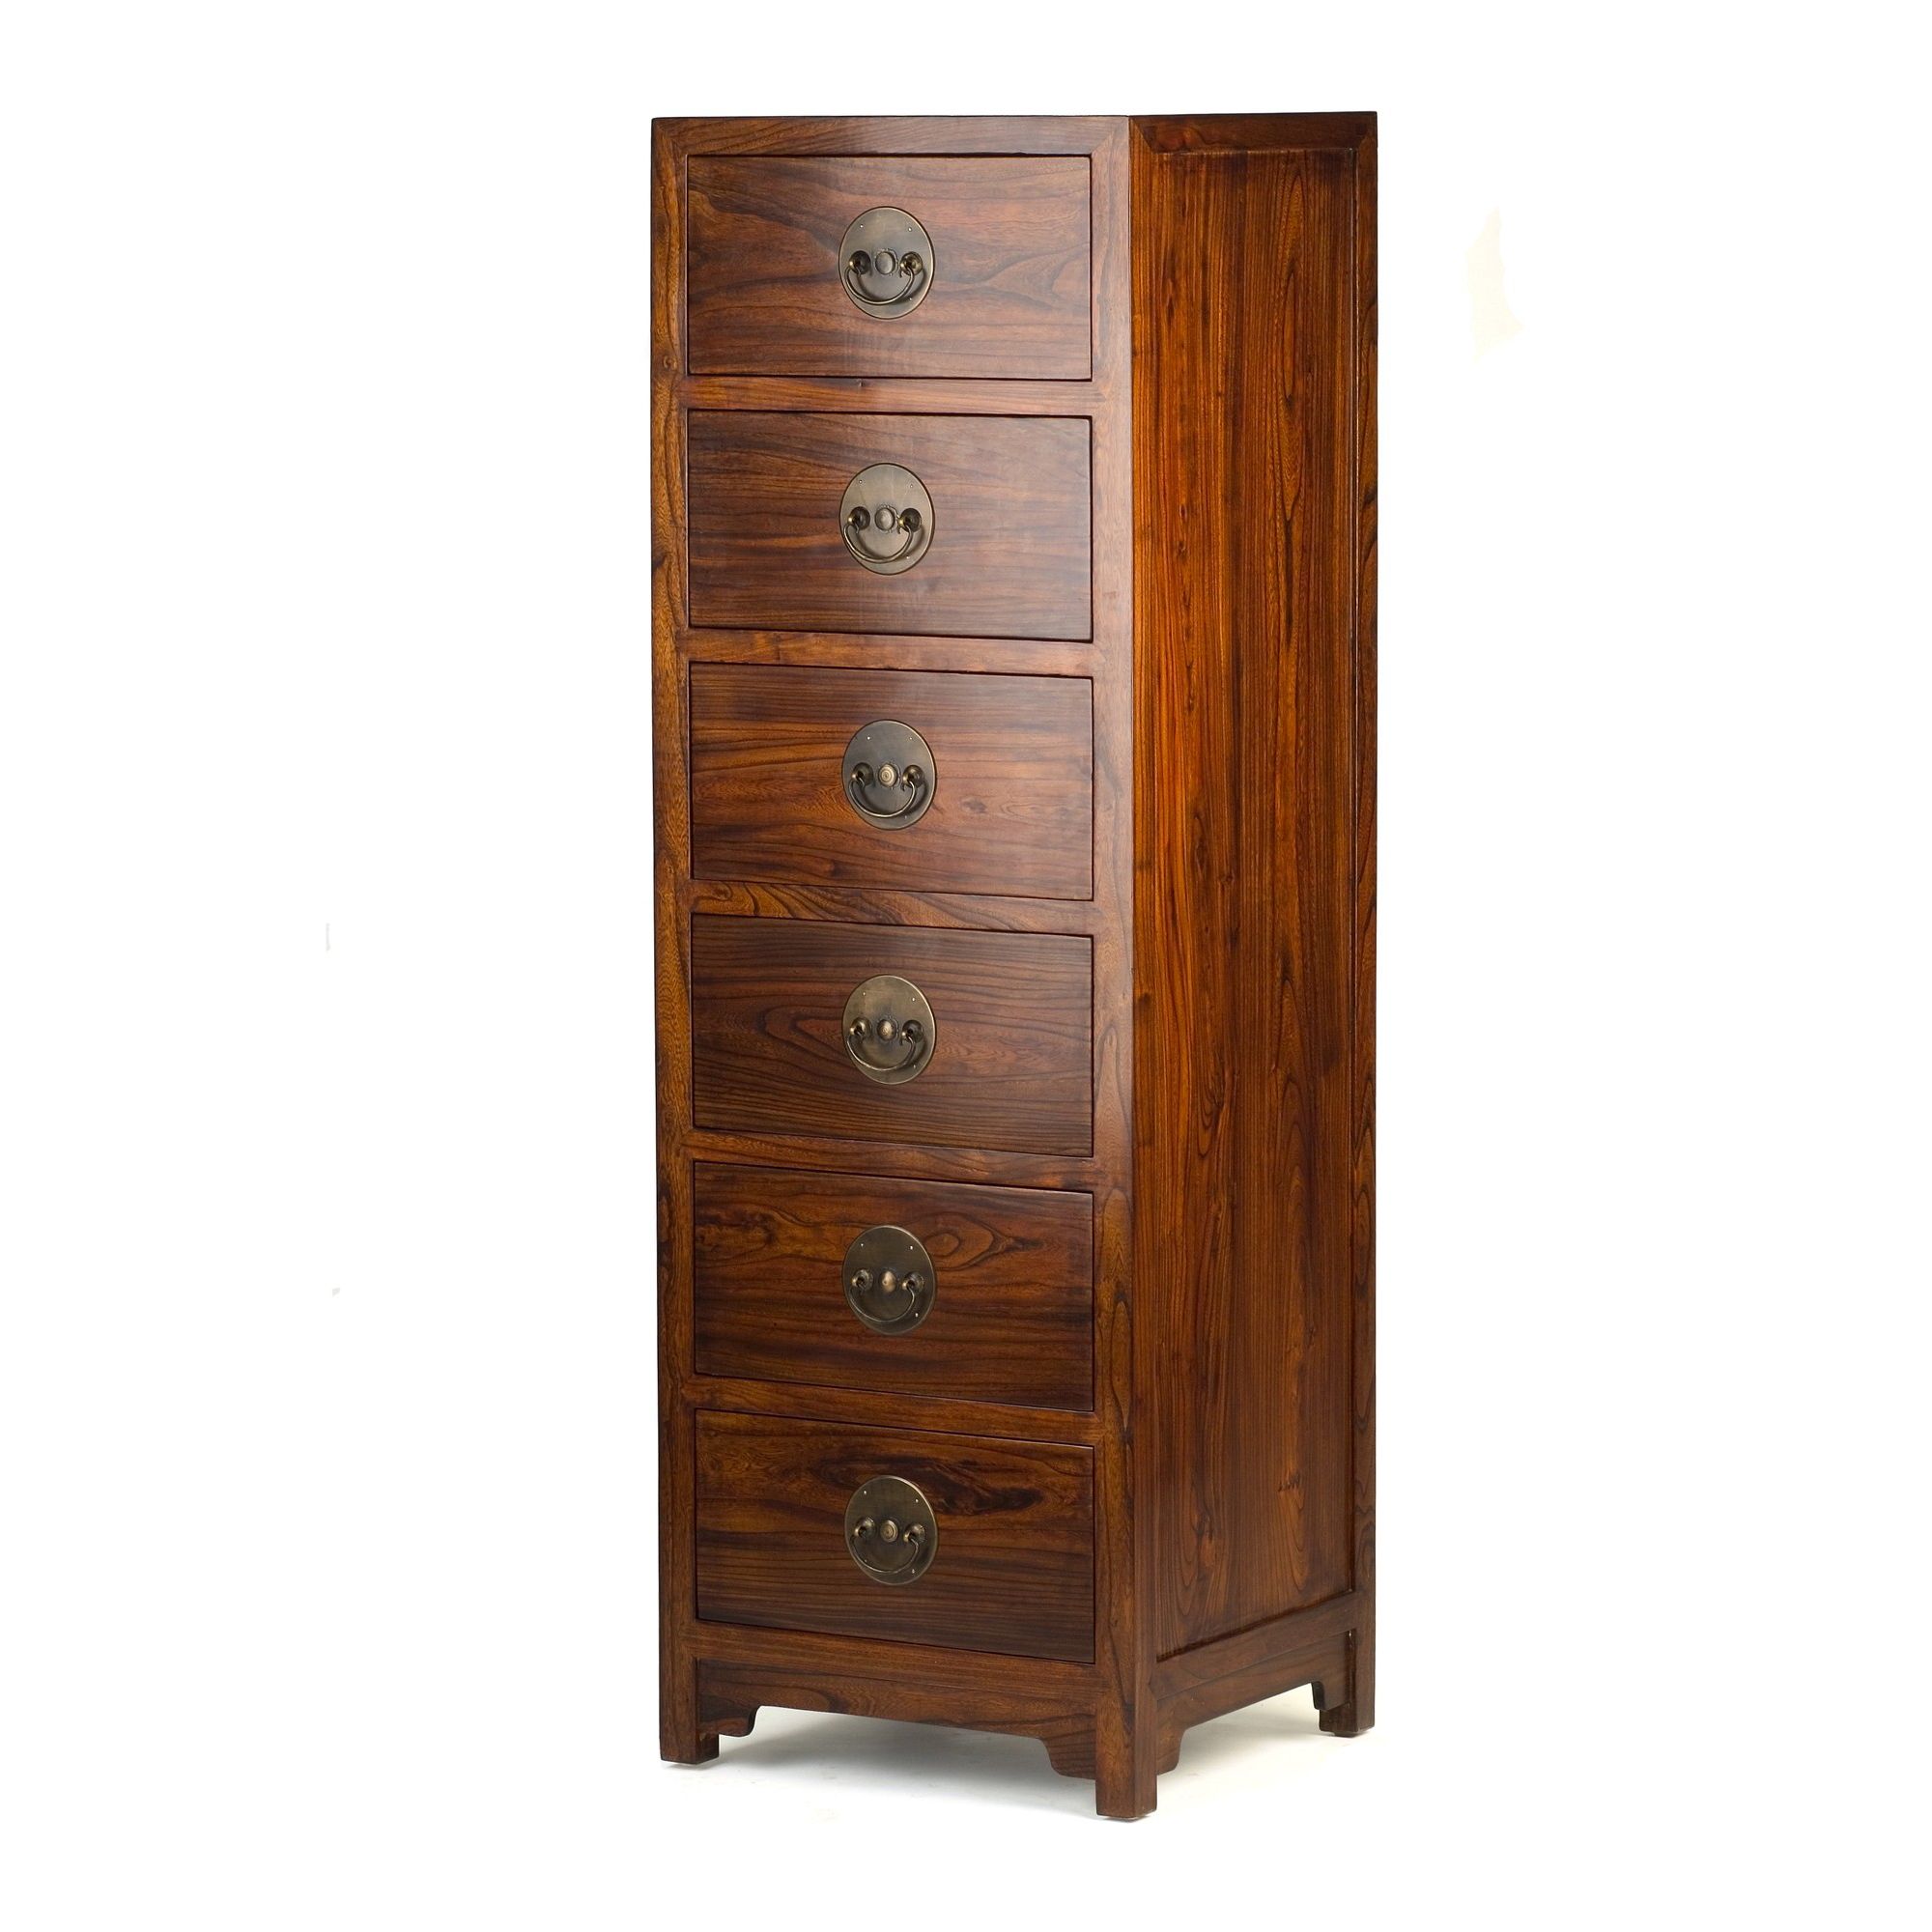 Shimu Chinese Classical Ming Tall Boy Chest - Warm Elm at Tesco Direct